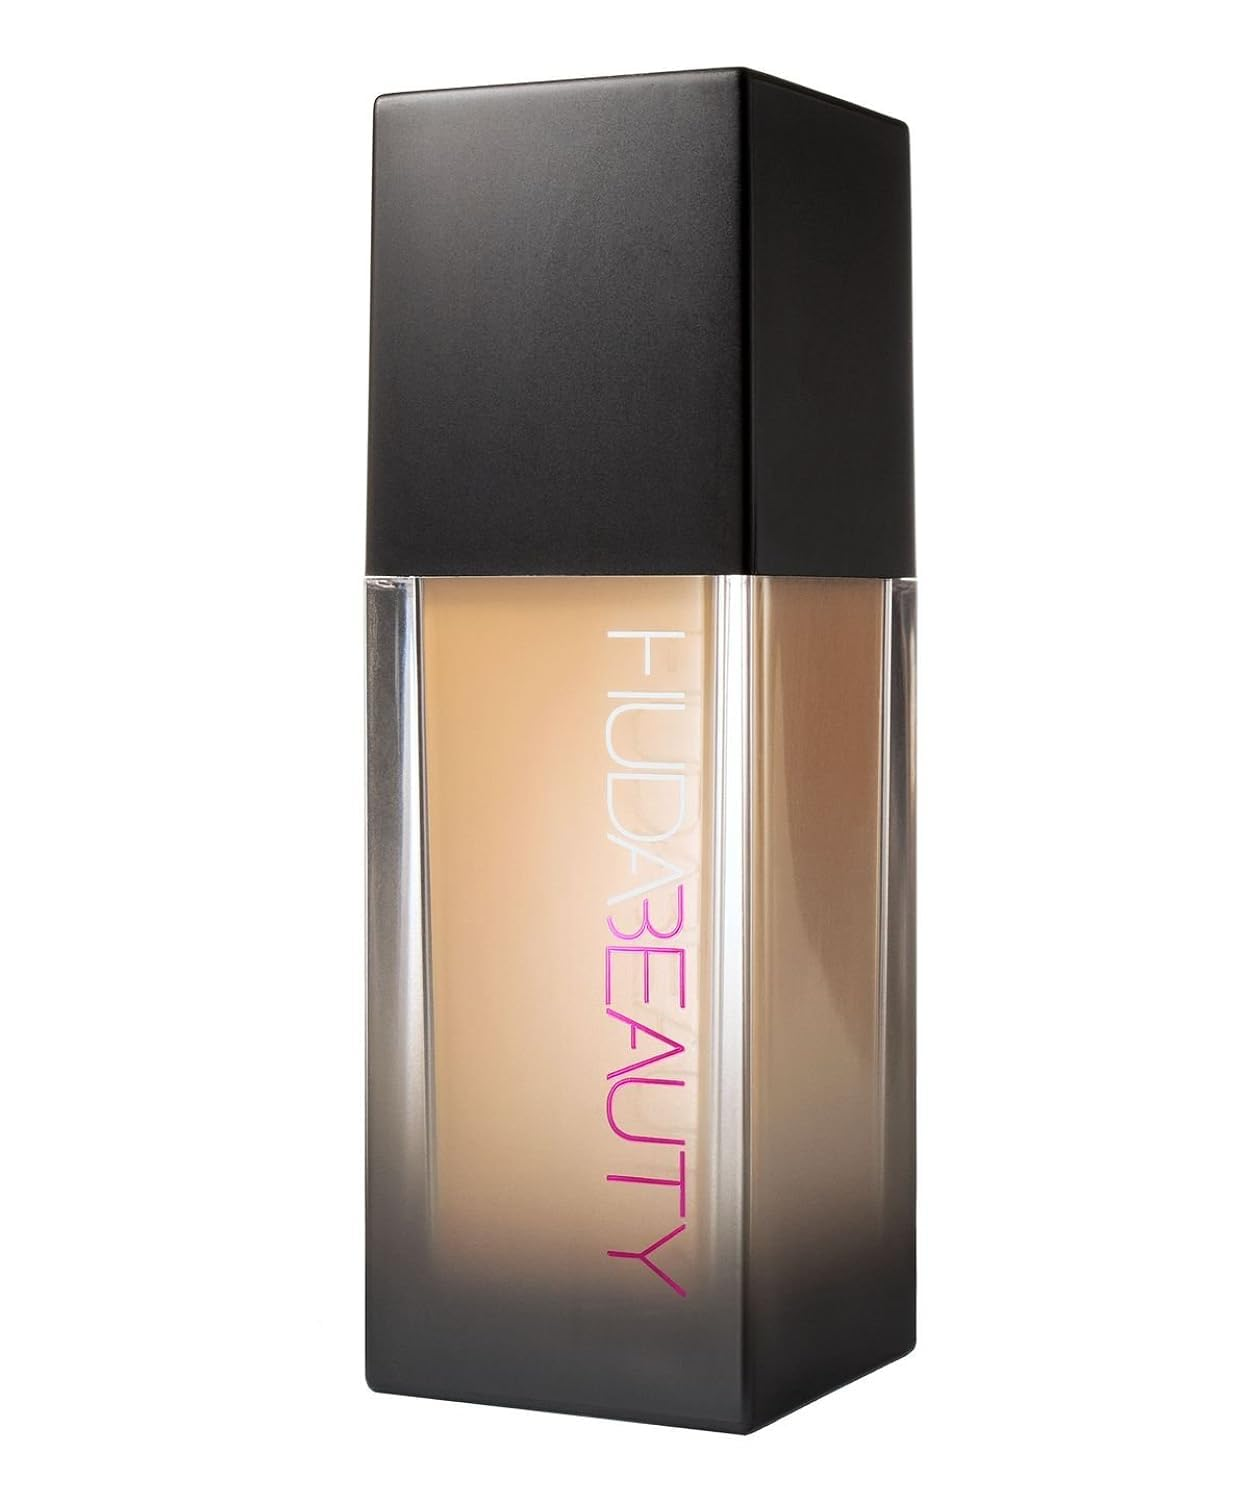 Huda Beauty Faux Filter Foundation providing a full-coverage glow and powder foundations